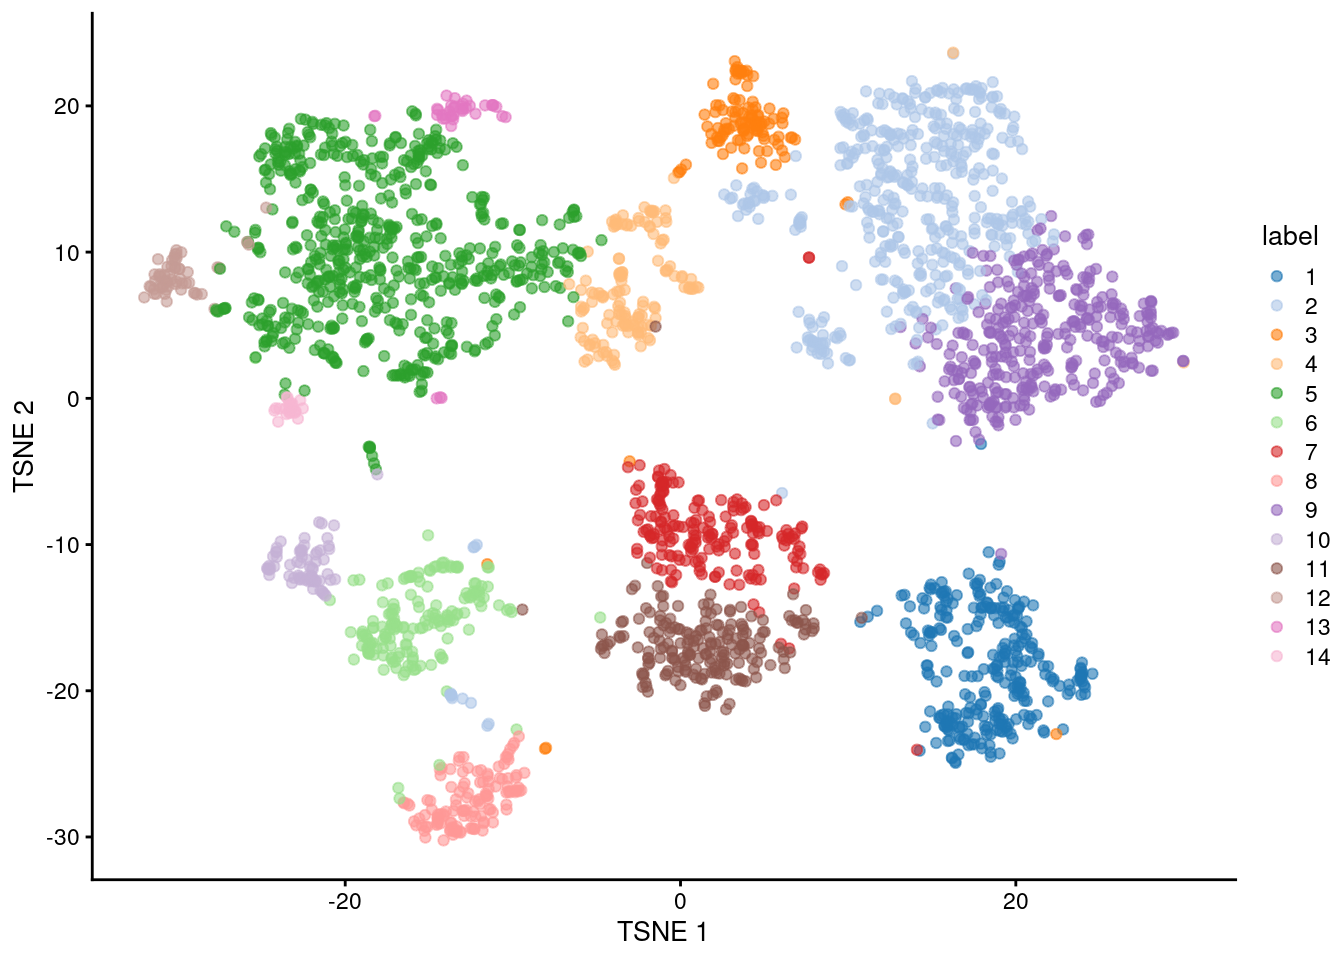 Obligatory $t$-SNE plot of the Zeisel brain dataset, where each point represents a cell and is colored according to the assigned cluster.